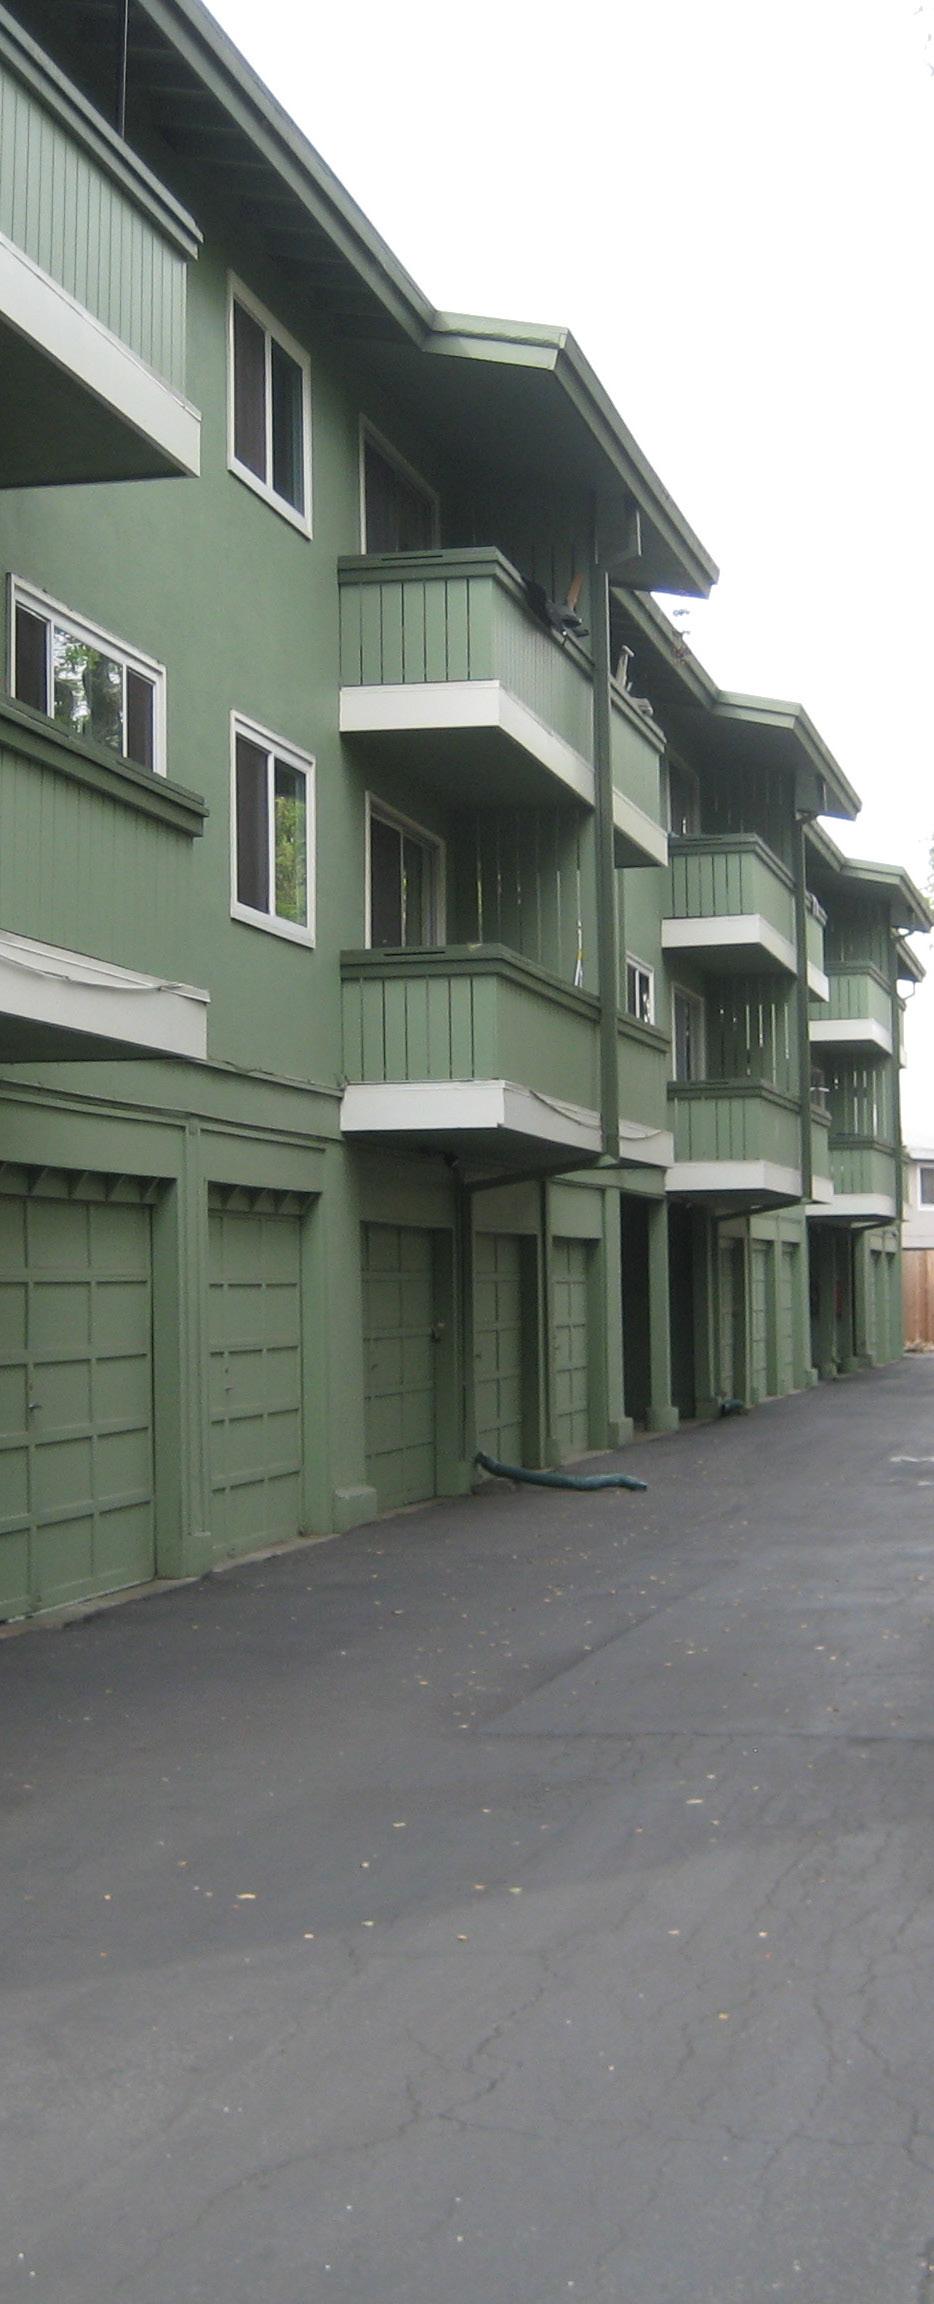 PROPERTY SECTION DESCRIPTION Property Highlights LOCATION: 1491 Hess Road, 441 & 403 Poplar Avenue Redwood City, CA 94061 > Rare 85-Unit Apartment Asset in the Heart of Redwood City > Private, Gated